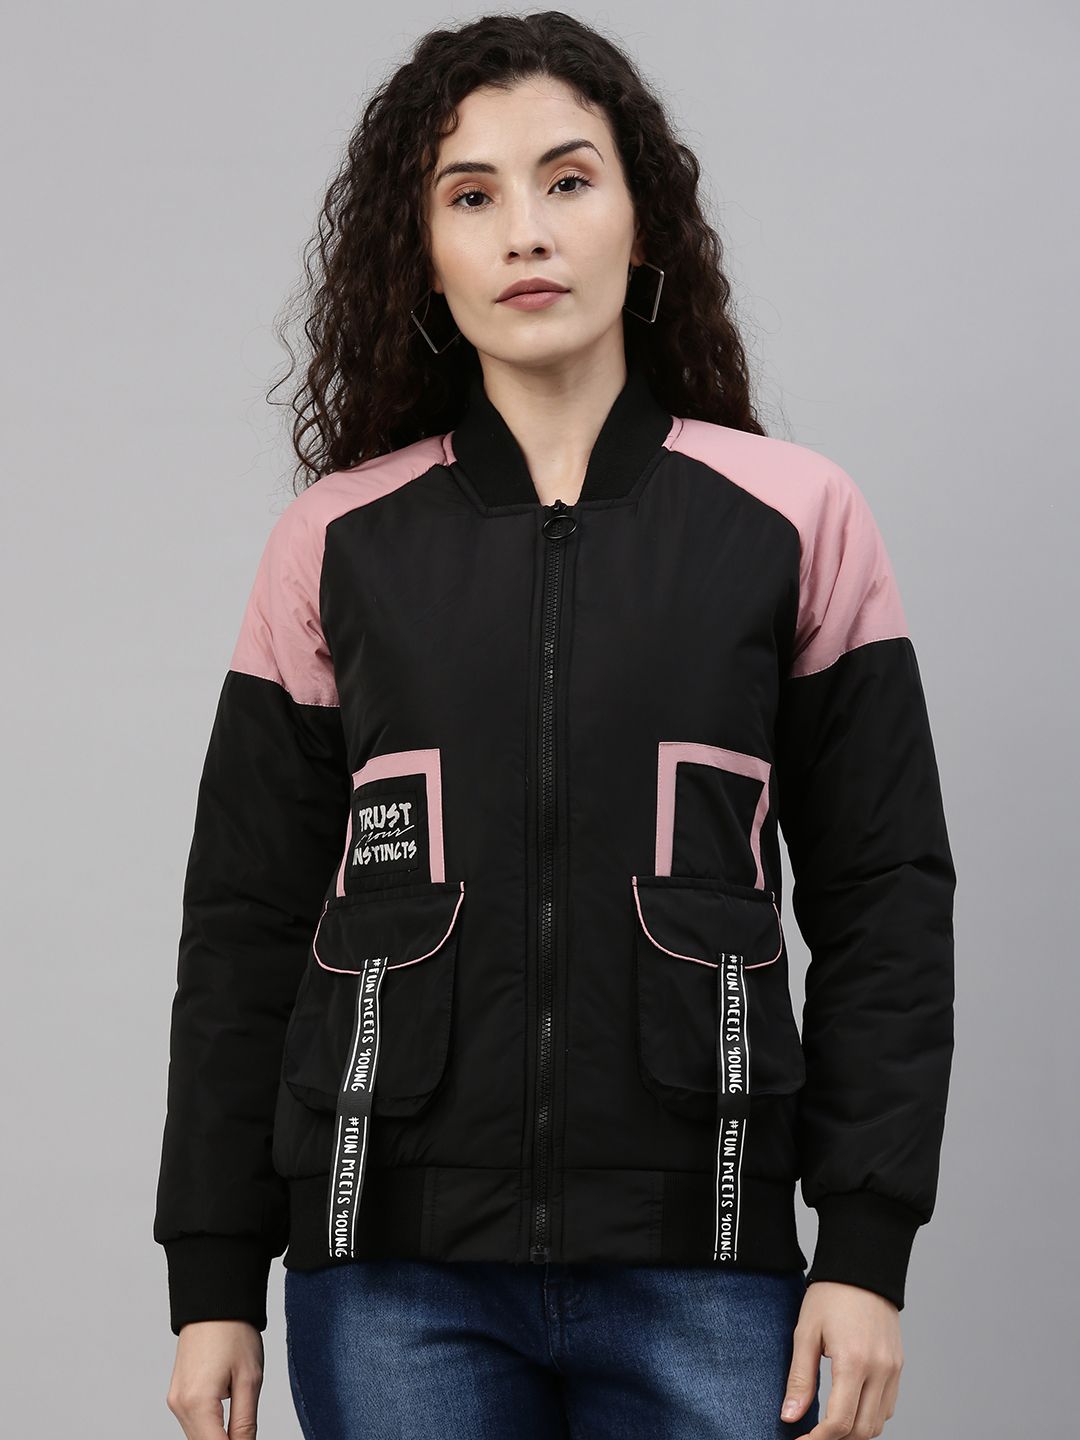 Campus Sutra Women Black Windcheater Bomber Jacket Price in India